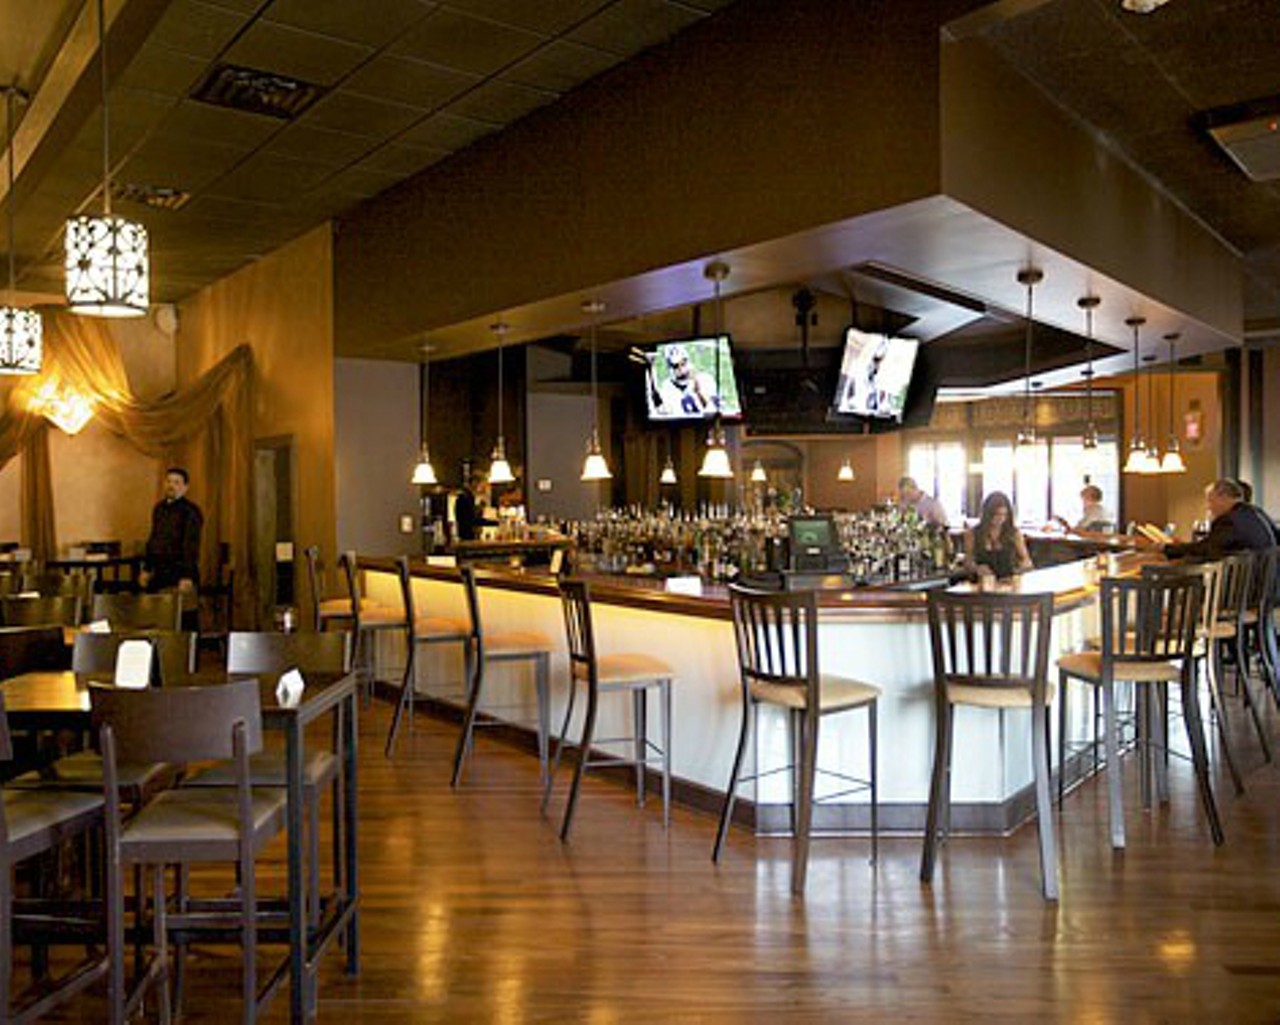 Monarch
7401 Manchester Rd.
All of the big chefs started at Monarch and all of St. Louis loved to dine at Monarch. This Maplewood favorite was called a "food lover's paradise," offering haute cuisine with a French twist.
Photo courtesy of Jennifer Silverberg